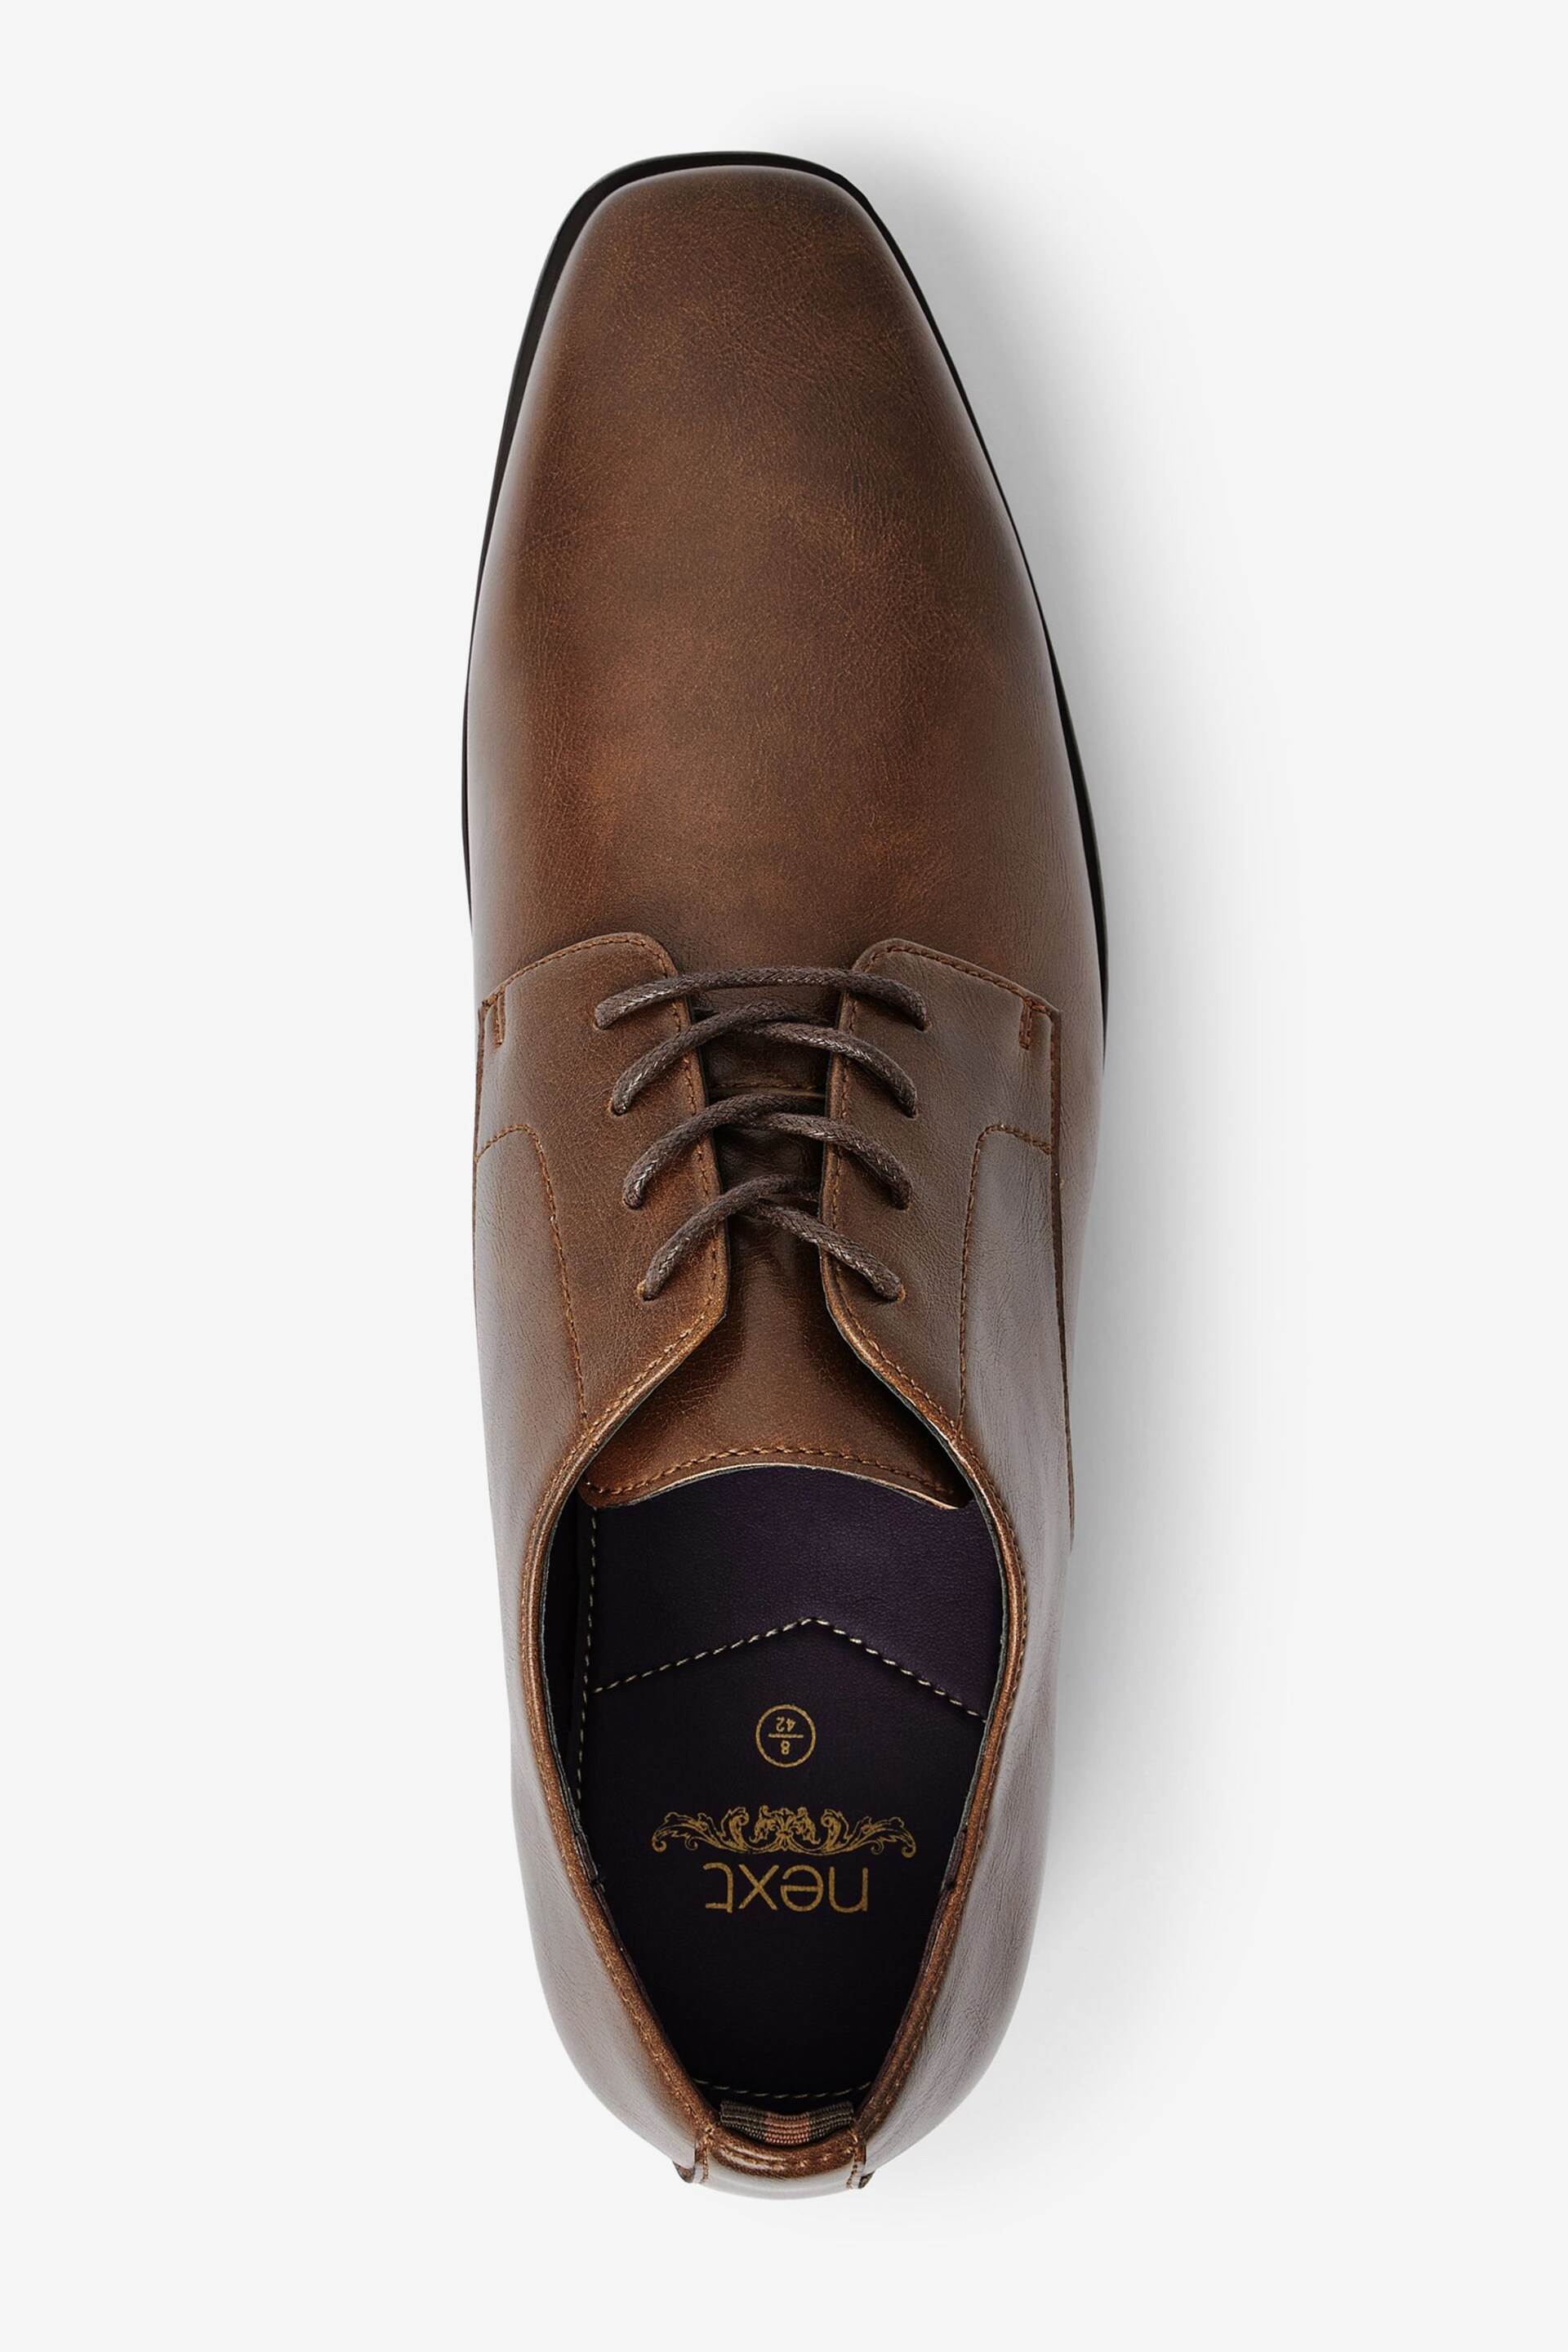 Tan Brown Slim Square Derby Shoes - Image 4 of 10